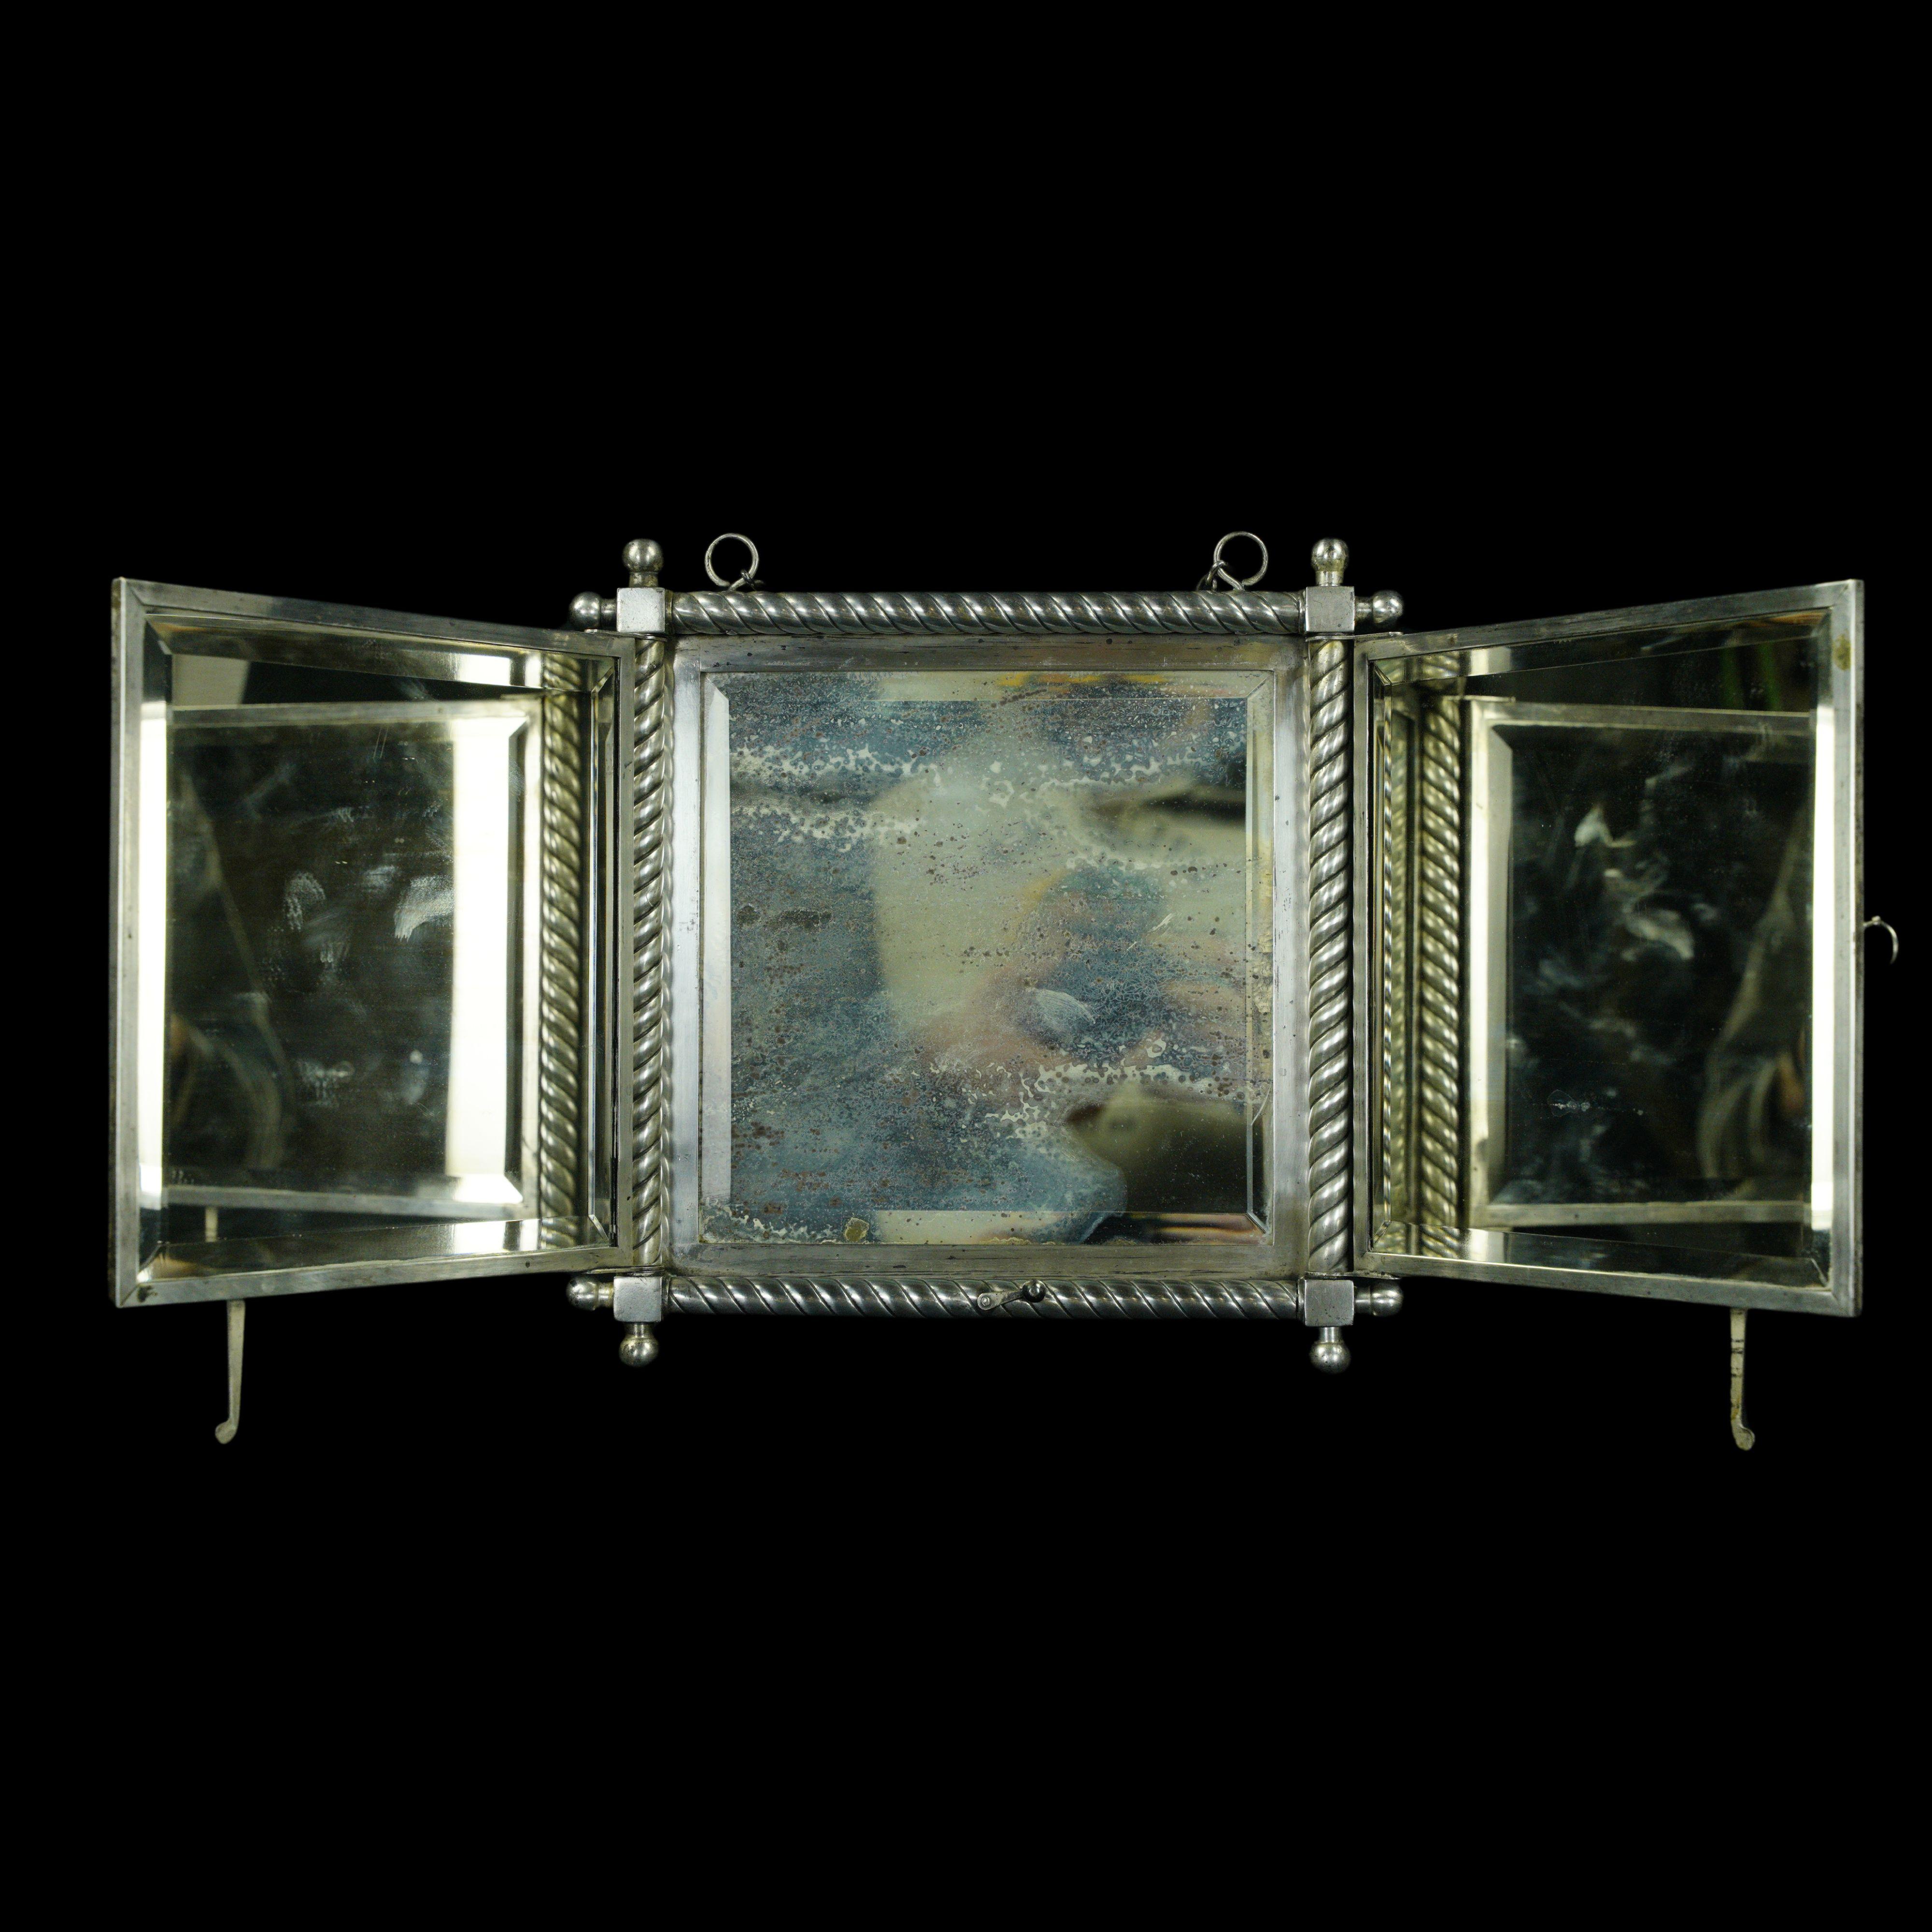 Quadruple silvered tri-fold beveled shaving mirror with decorative details. Stamped Derby Silver. Quadruple plated. P. Wiederer's Patent April 19, 1887. 7 E. Good condition with appropriate wear from age, with minor scratches and tarnish. One